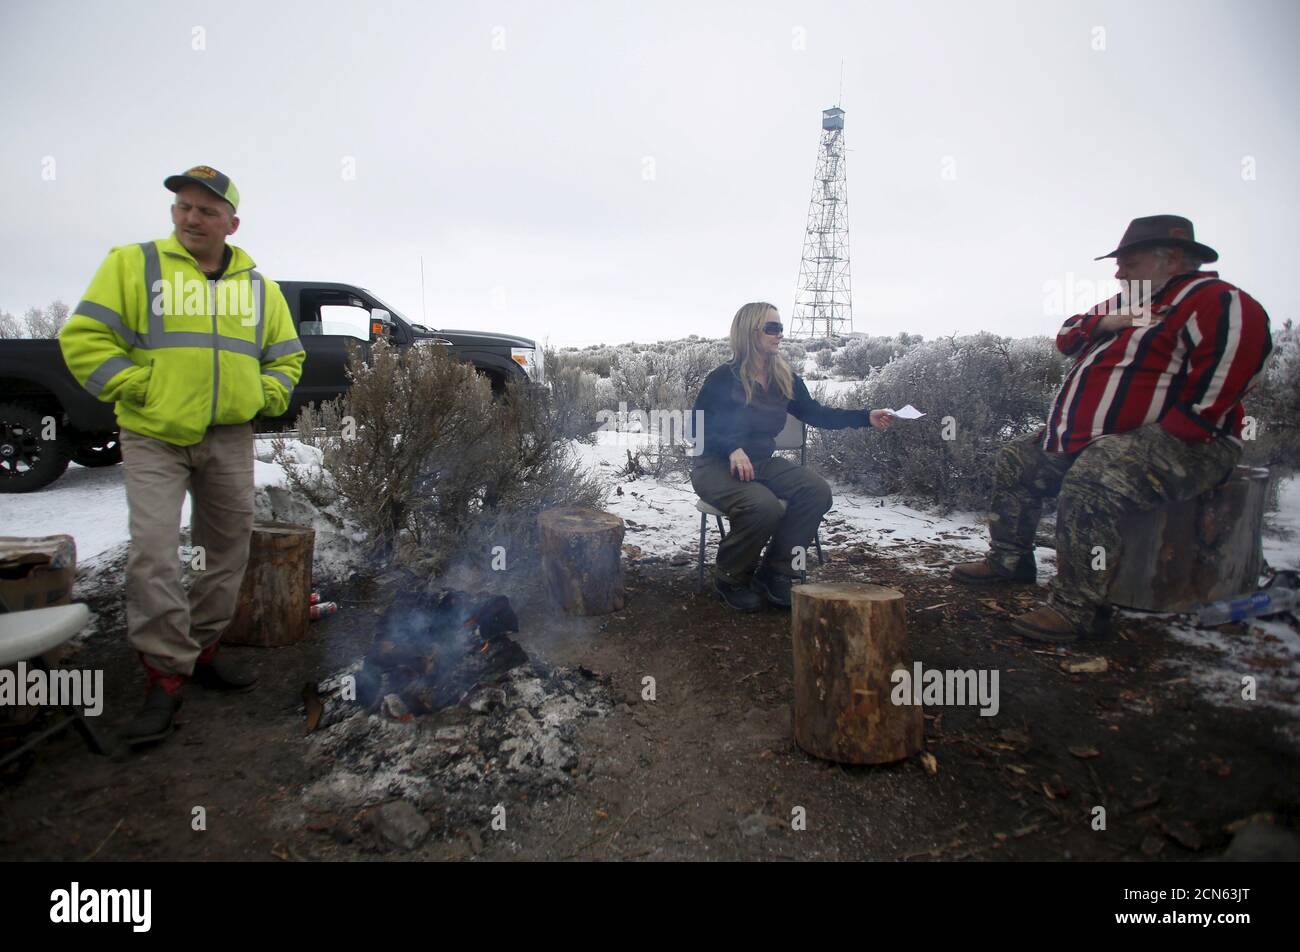 Occupiers sit by a fire at the Malheur National Wildlife Refuge near Burns, Oregon, January 10, 2016. Members of self-styled militia groups met on Friday with armed protesters occupying the federal wildlife refuge in Oregon, pledging support for their cause, if not their methods, and offering to act as a peace-keeping force in the week-long standoff over land rights. REUTERS/Jim Urquhart Stock Photo